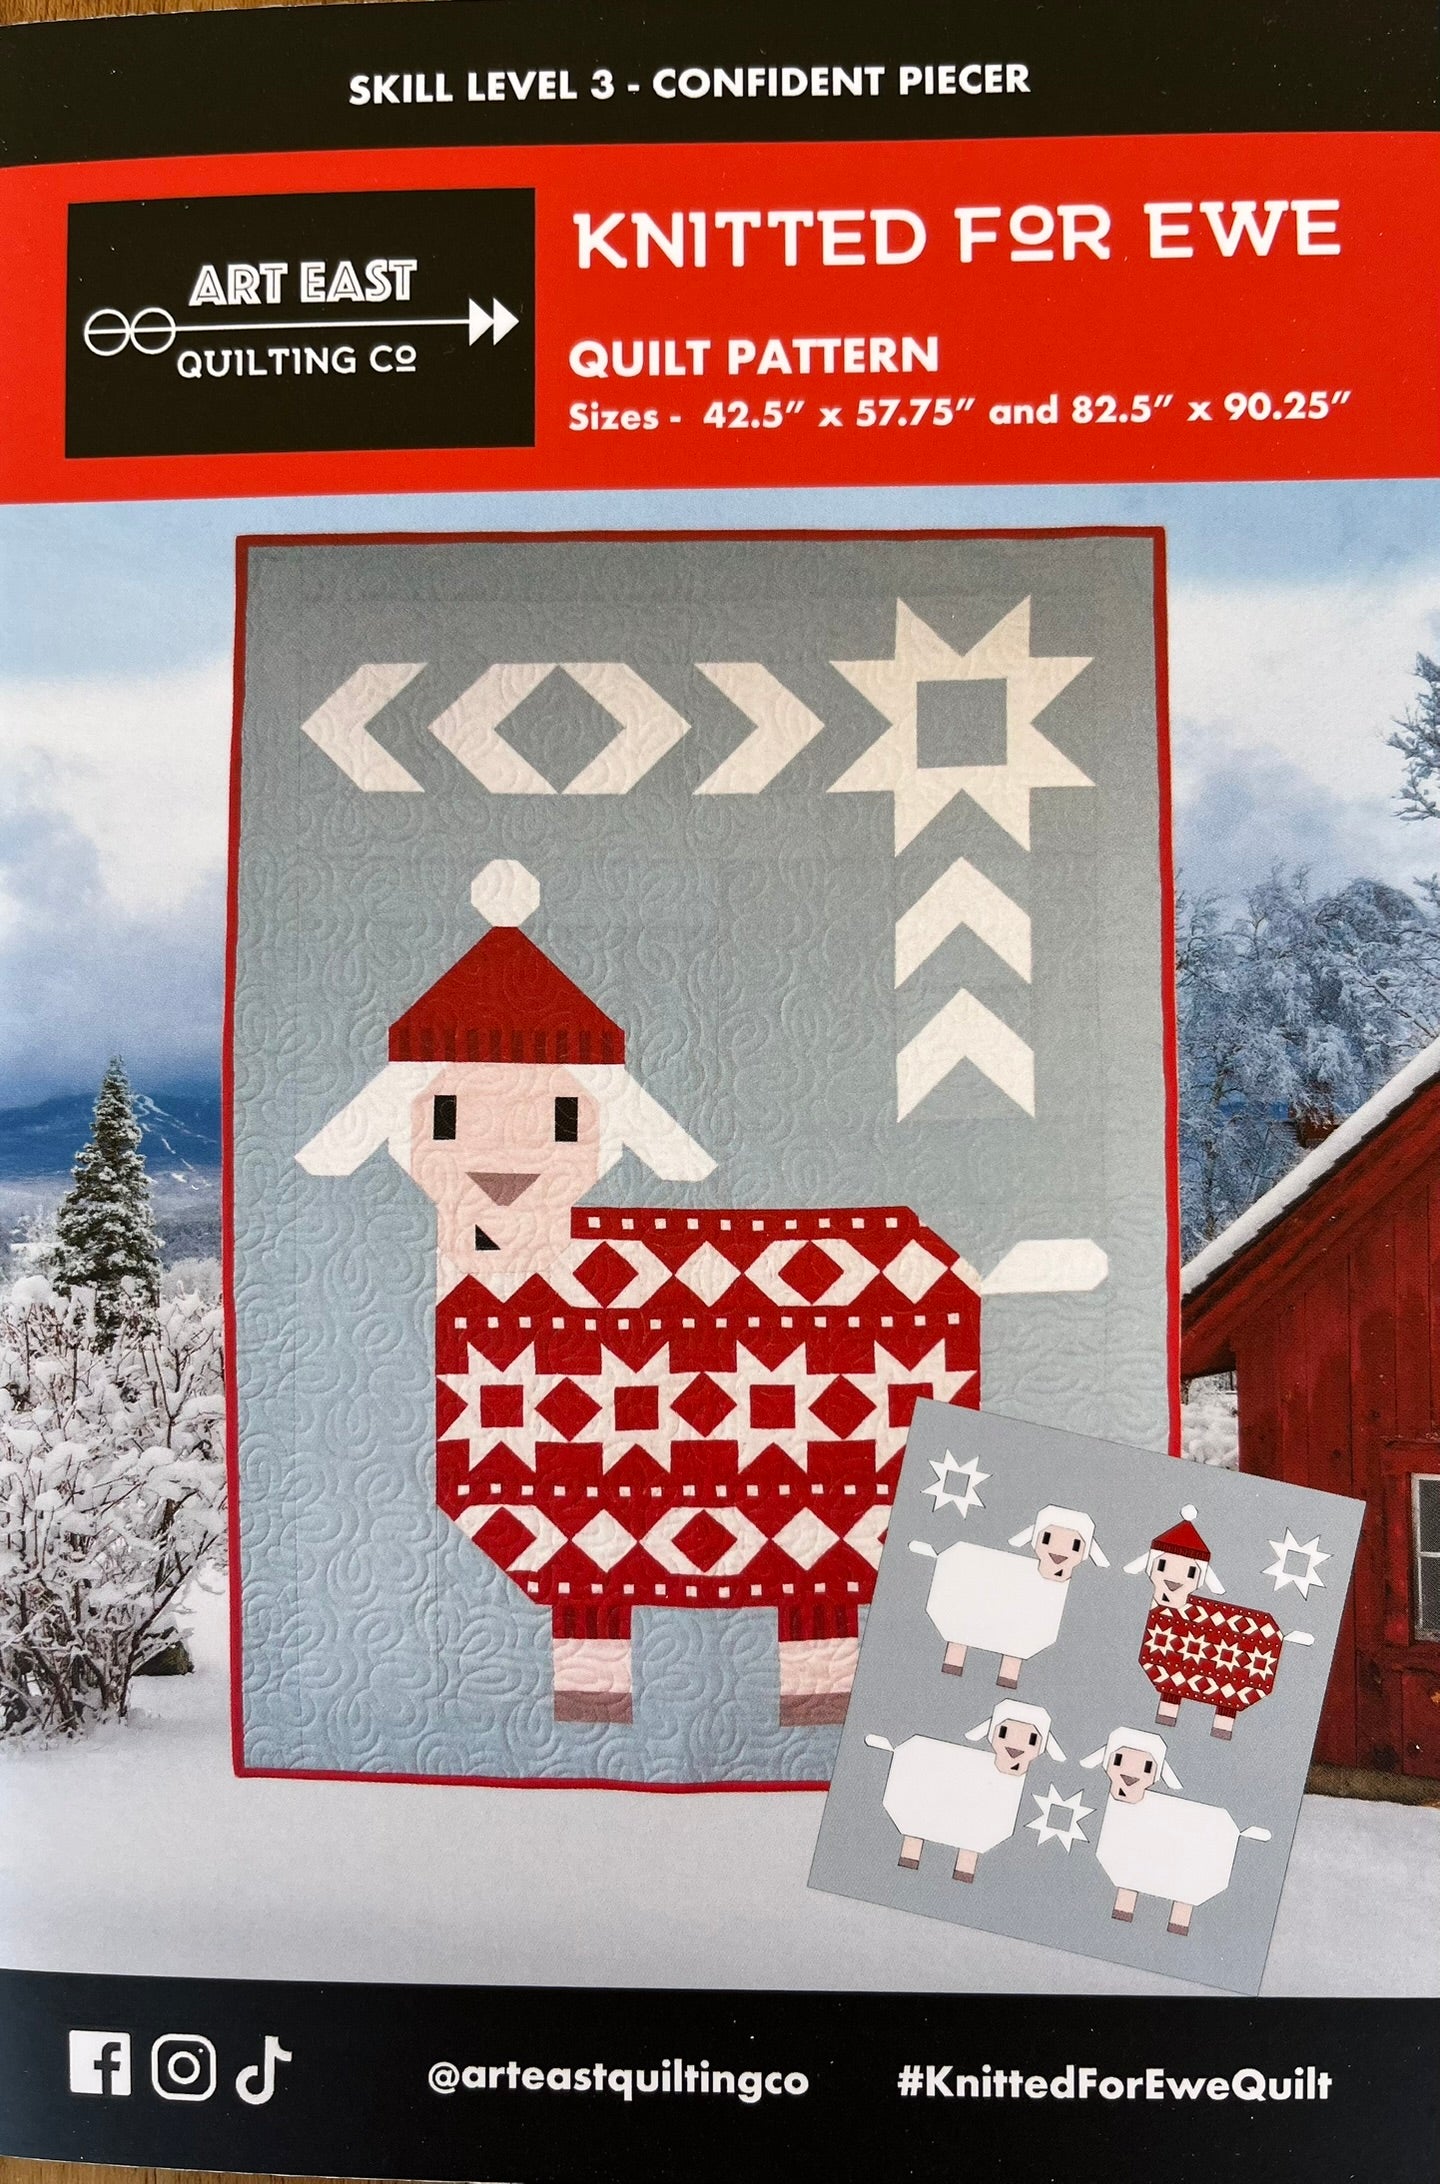 Knitted for Ewe Quilt Pattern by Art East Quilting Company